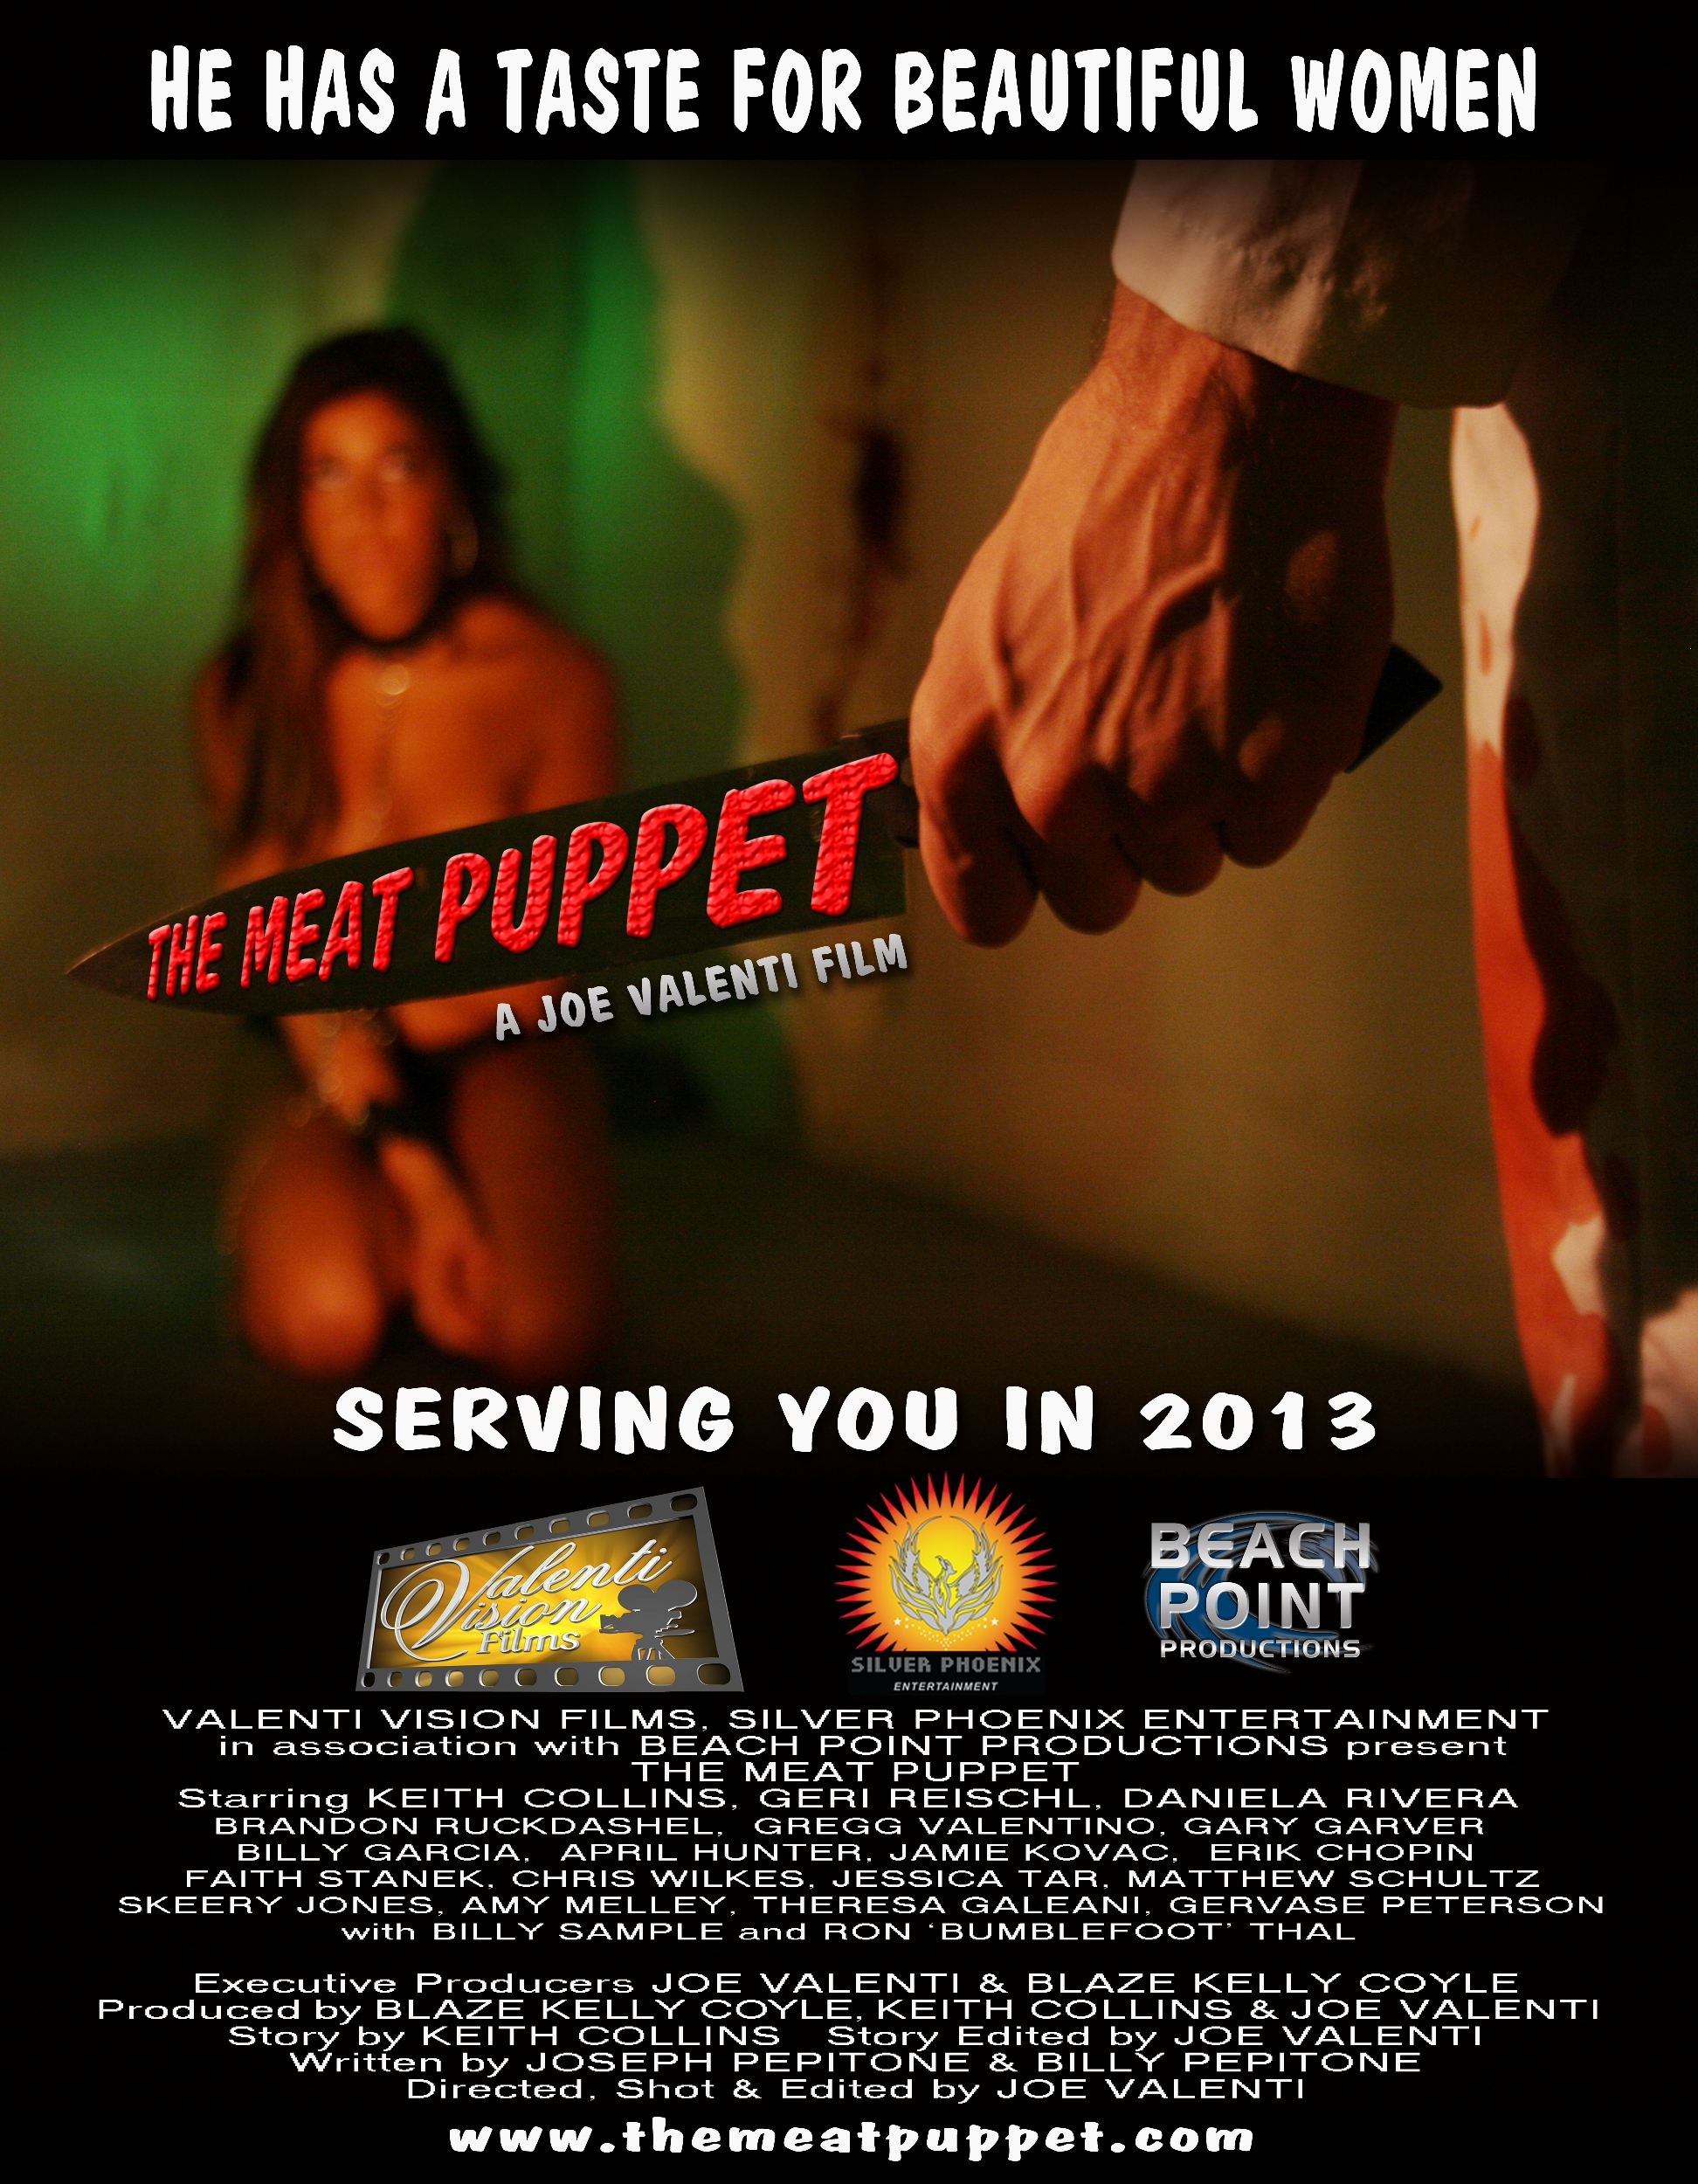 The Meat Puppet official movie poster, Produced by Silver Phoenix Entertainment, Valenti Vision Films and Beach Point Productions.